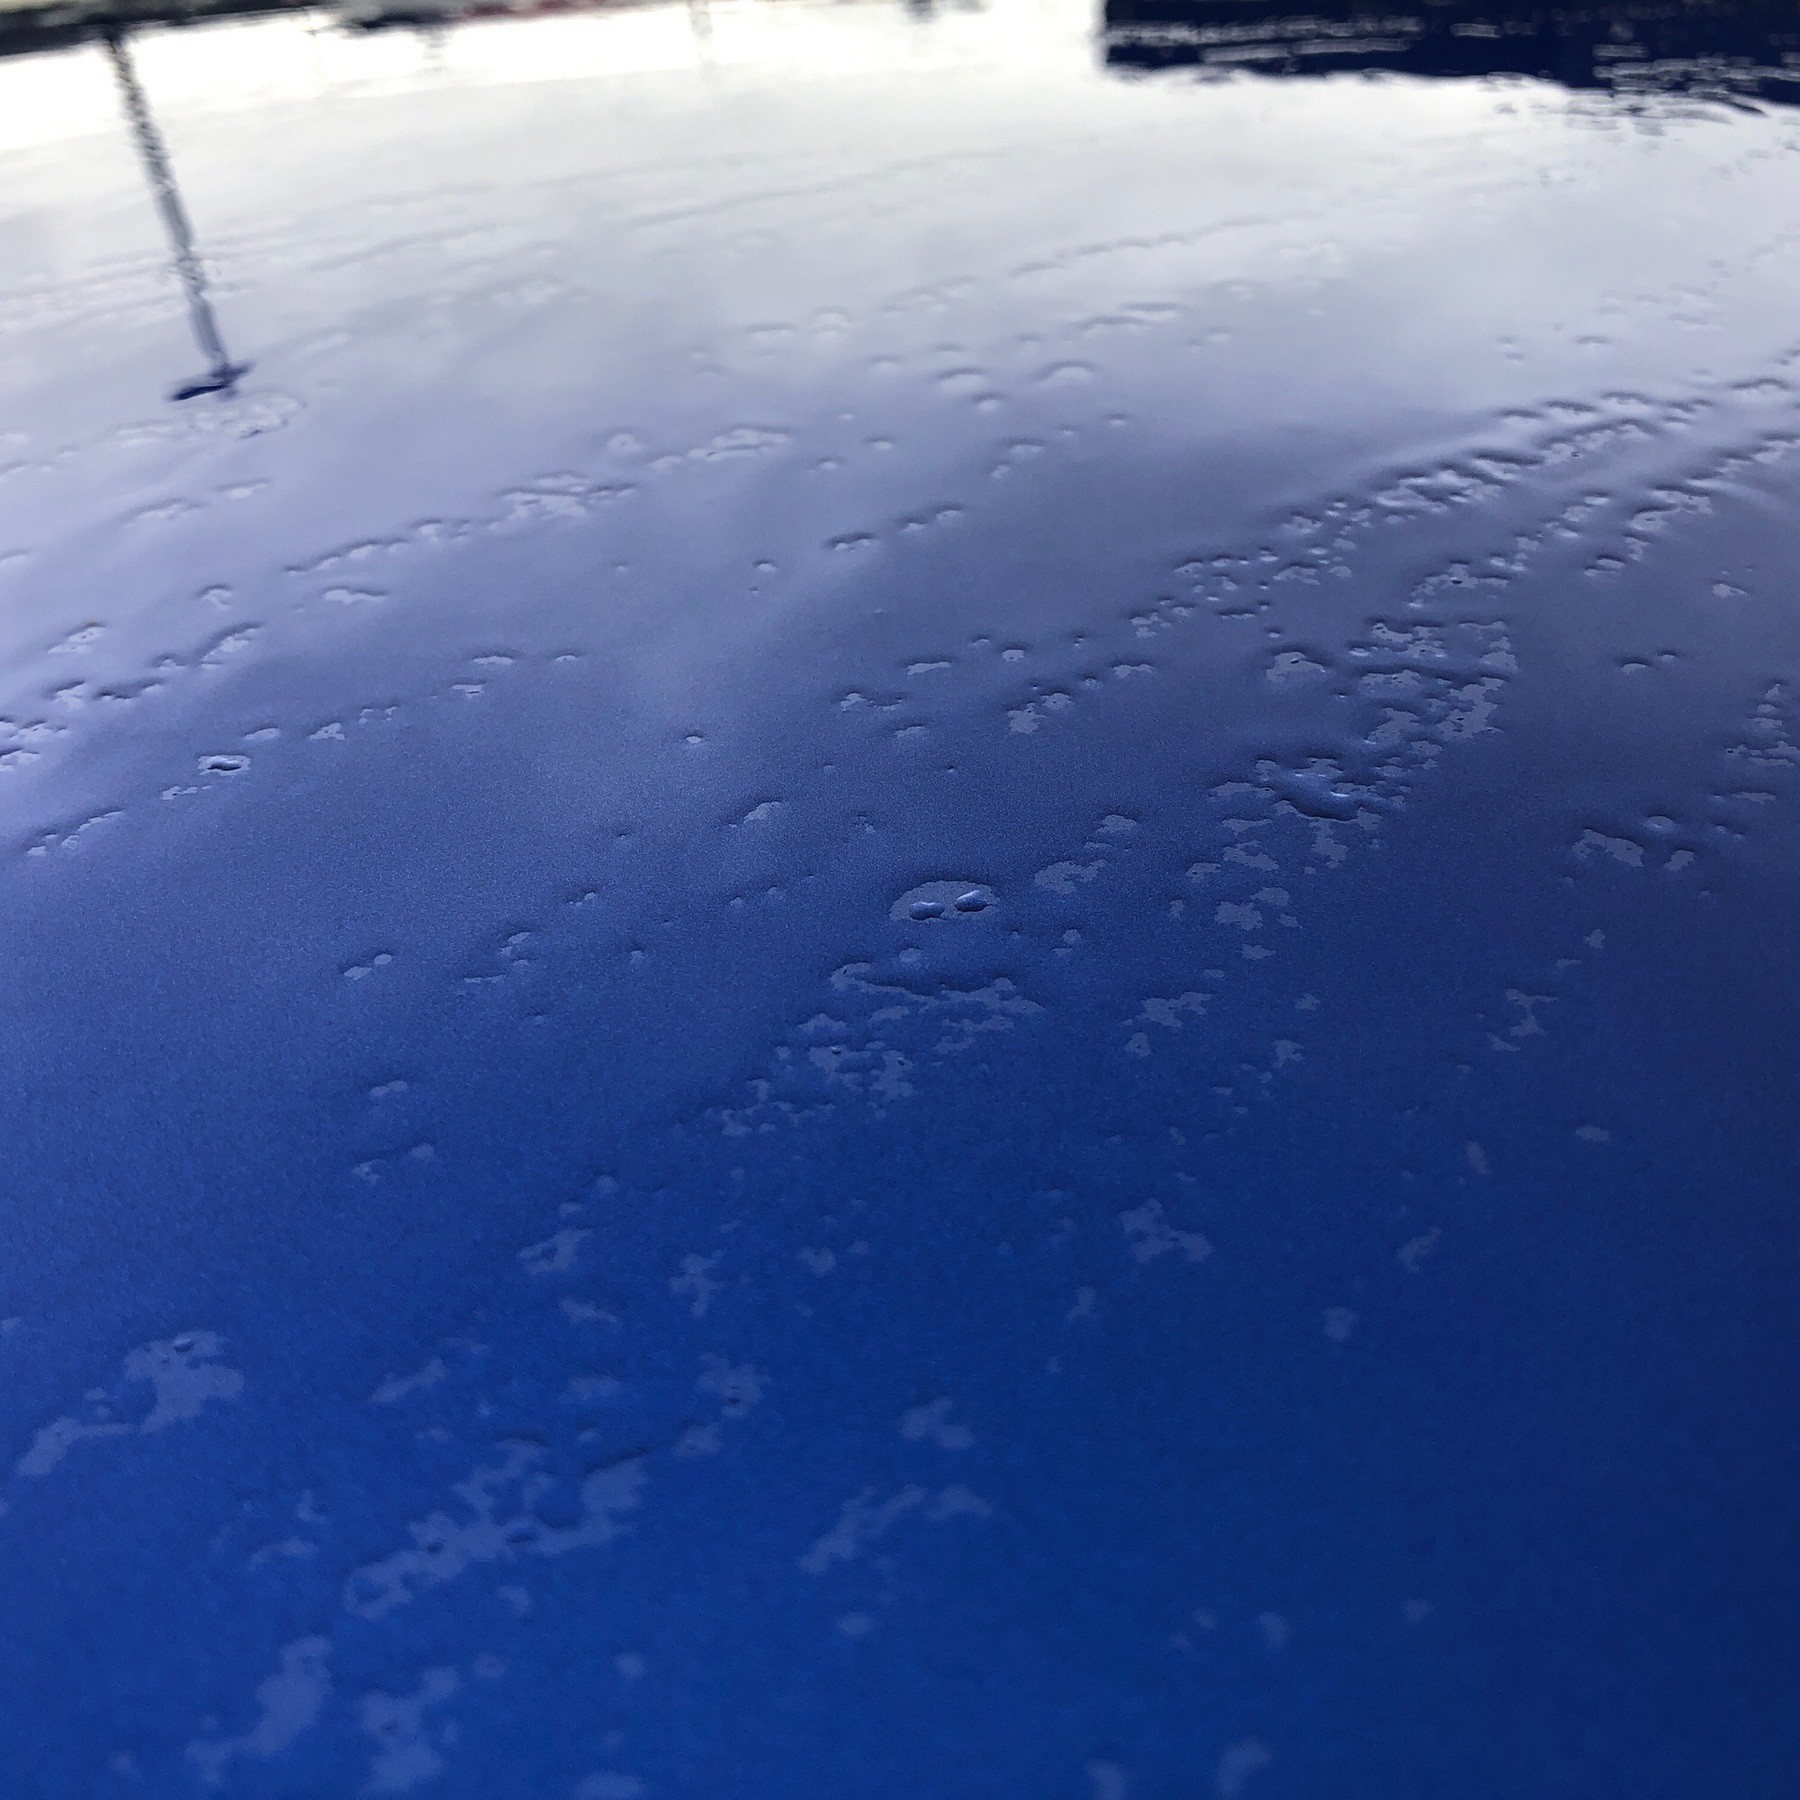 Wet car roof with sky and light reflected.